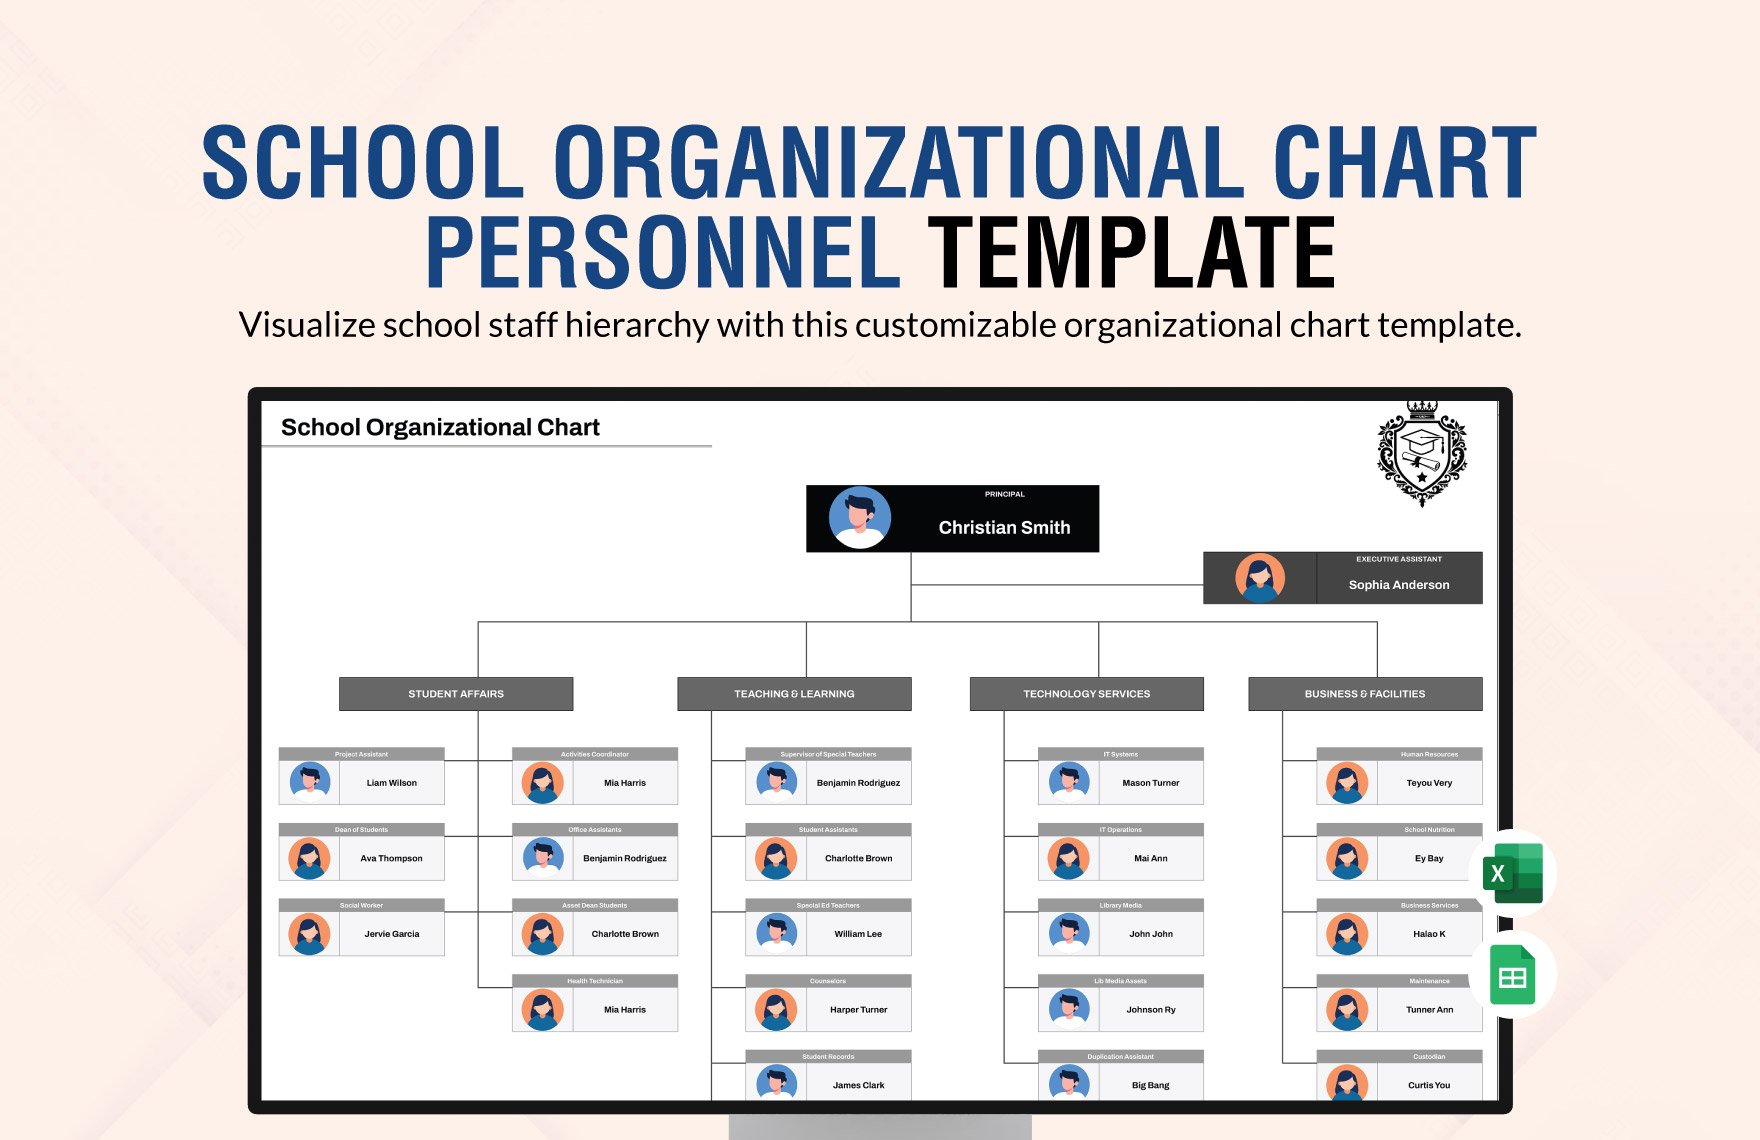 School Organizational Chart Personnel Template in Excel, Google Sheets